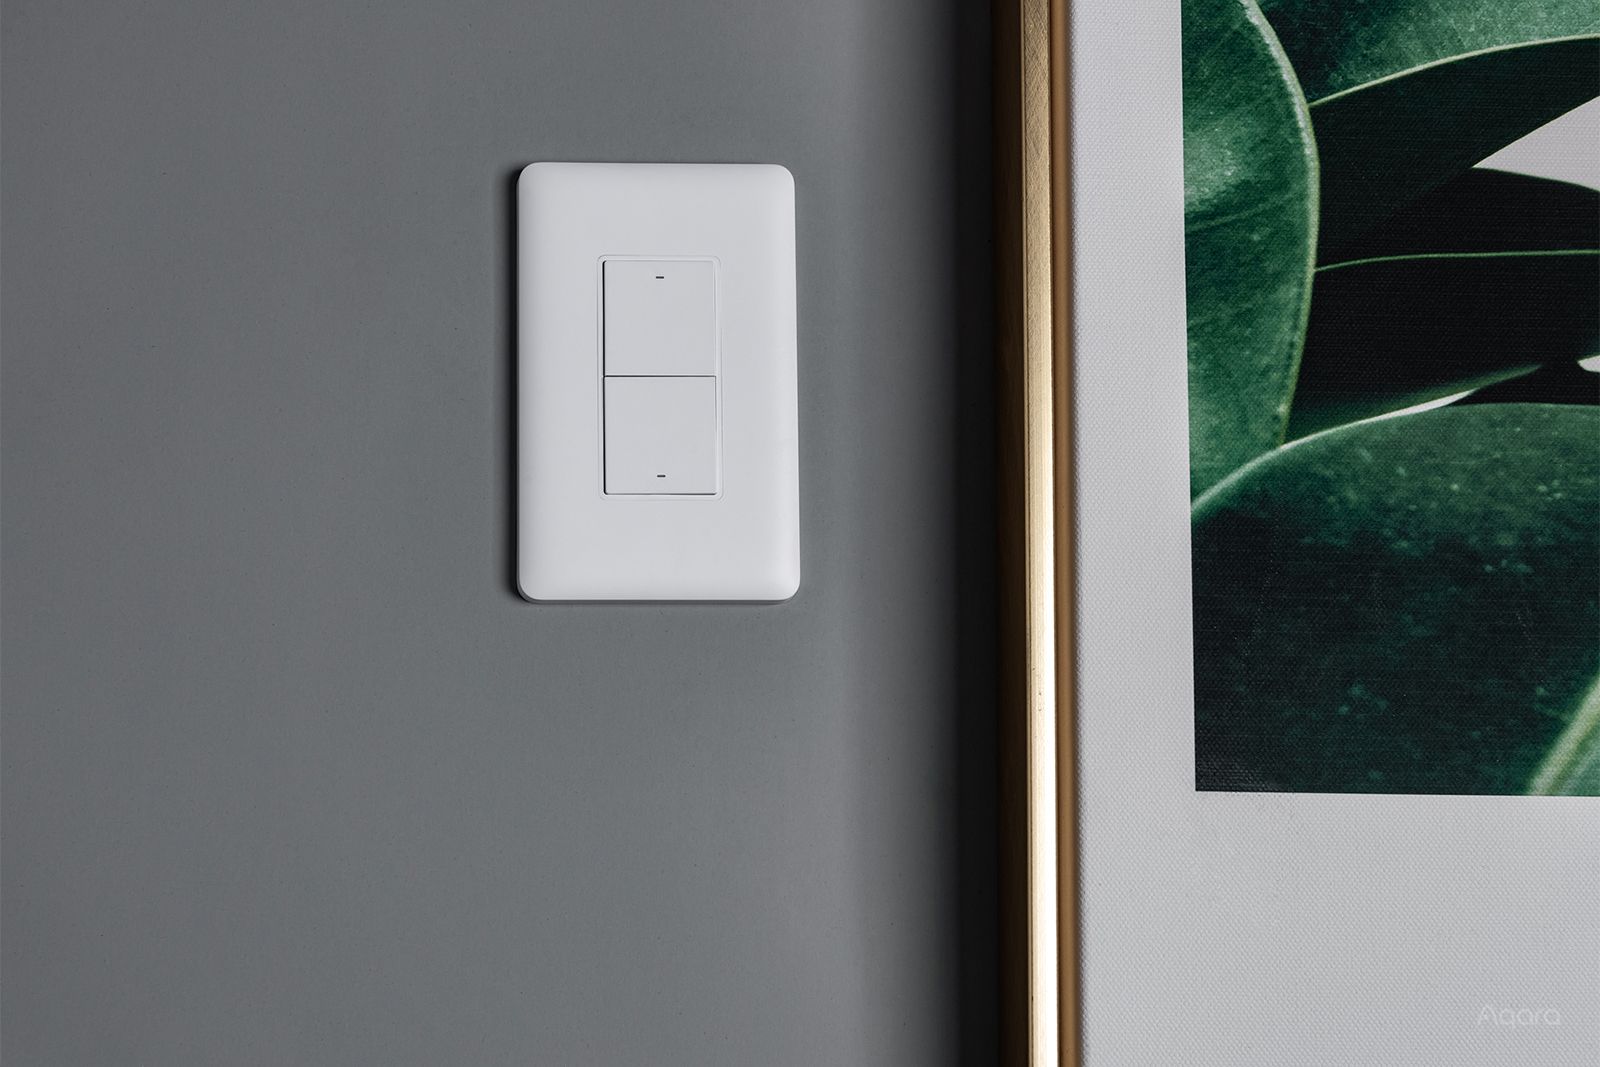 Aqara smart wall switch ultimate guide: Should you buy this wall switch? photo 2